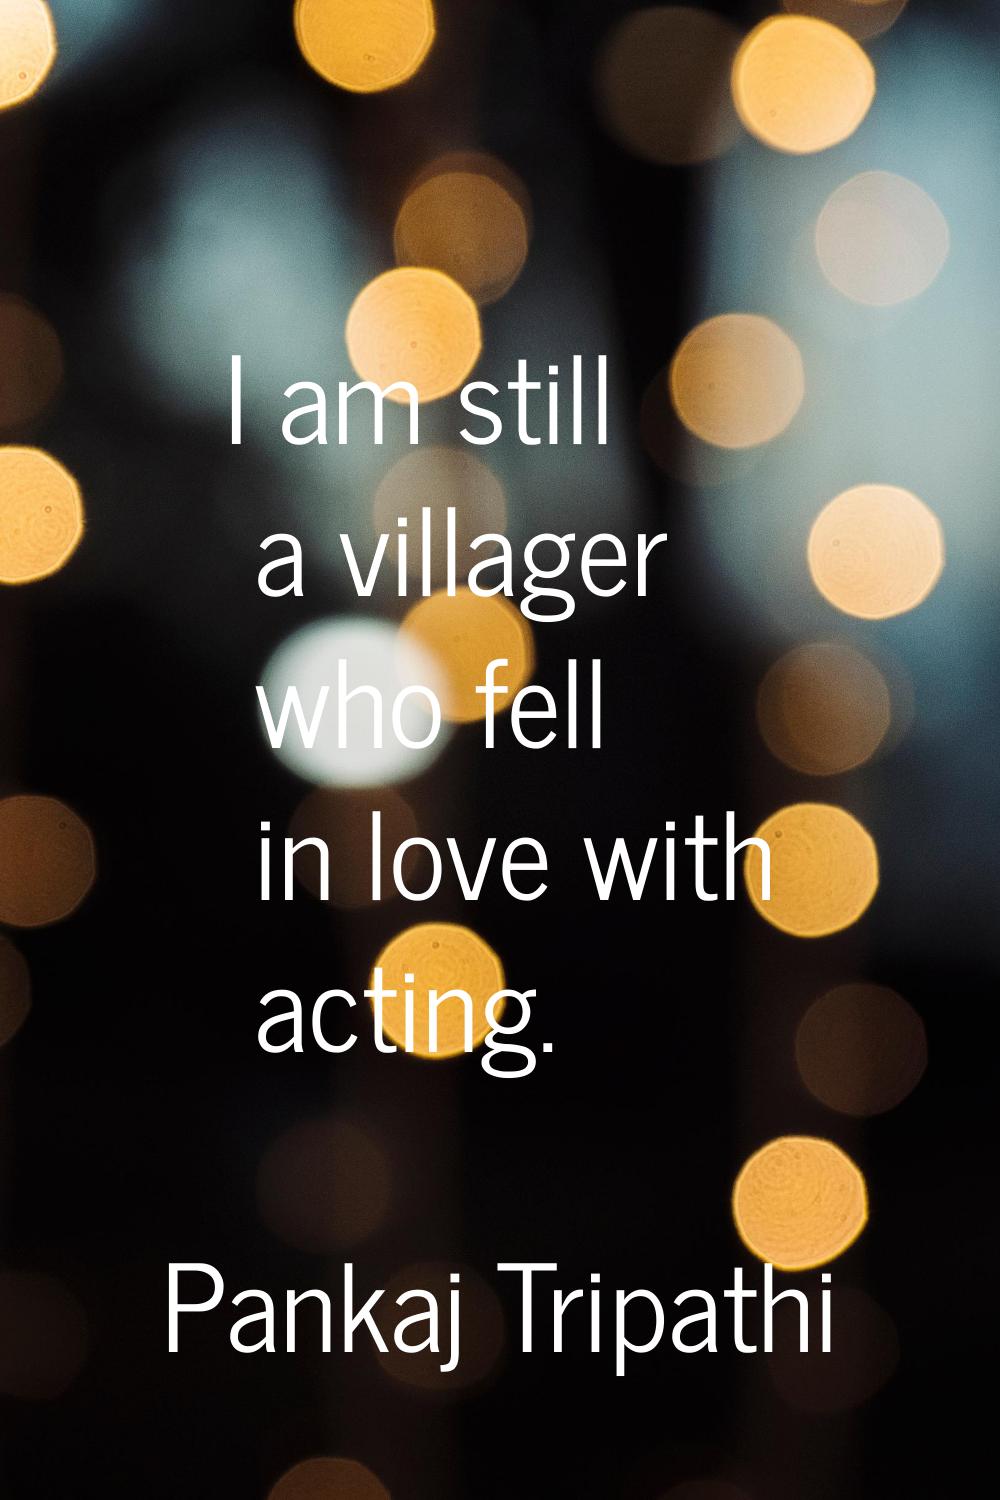 I am still a villager who fell in love with acting.